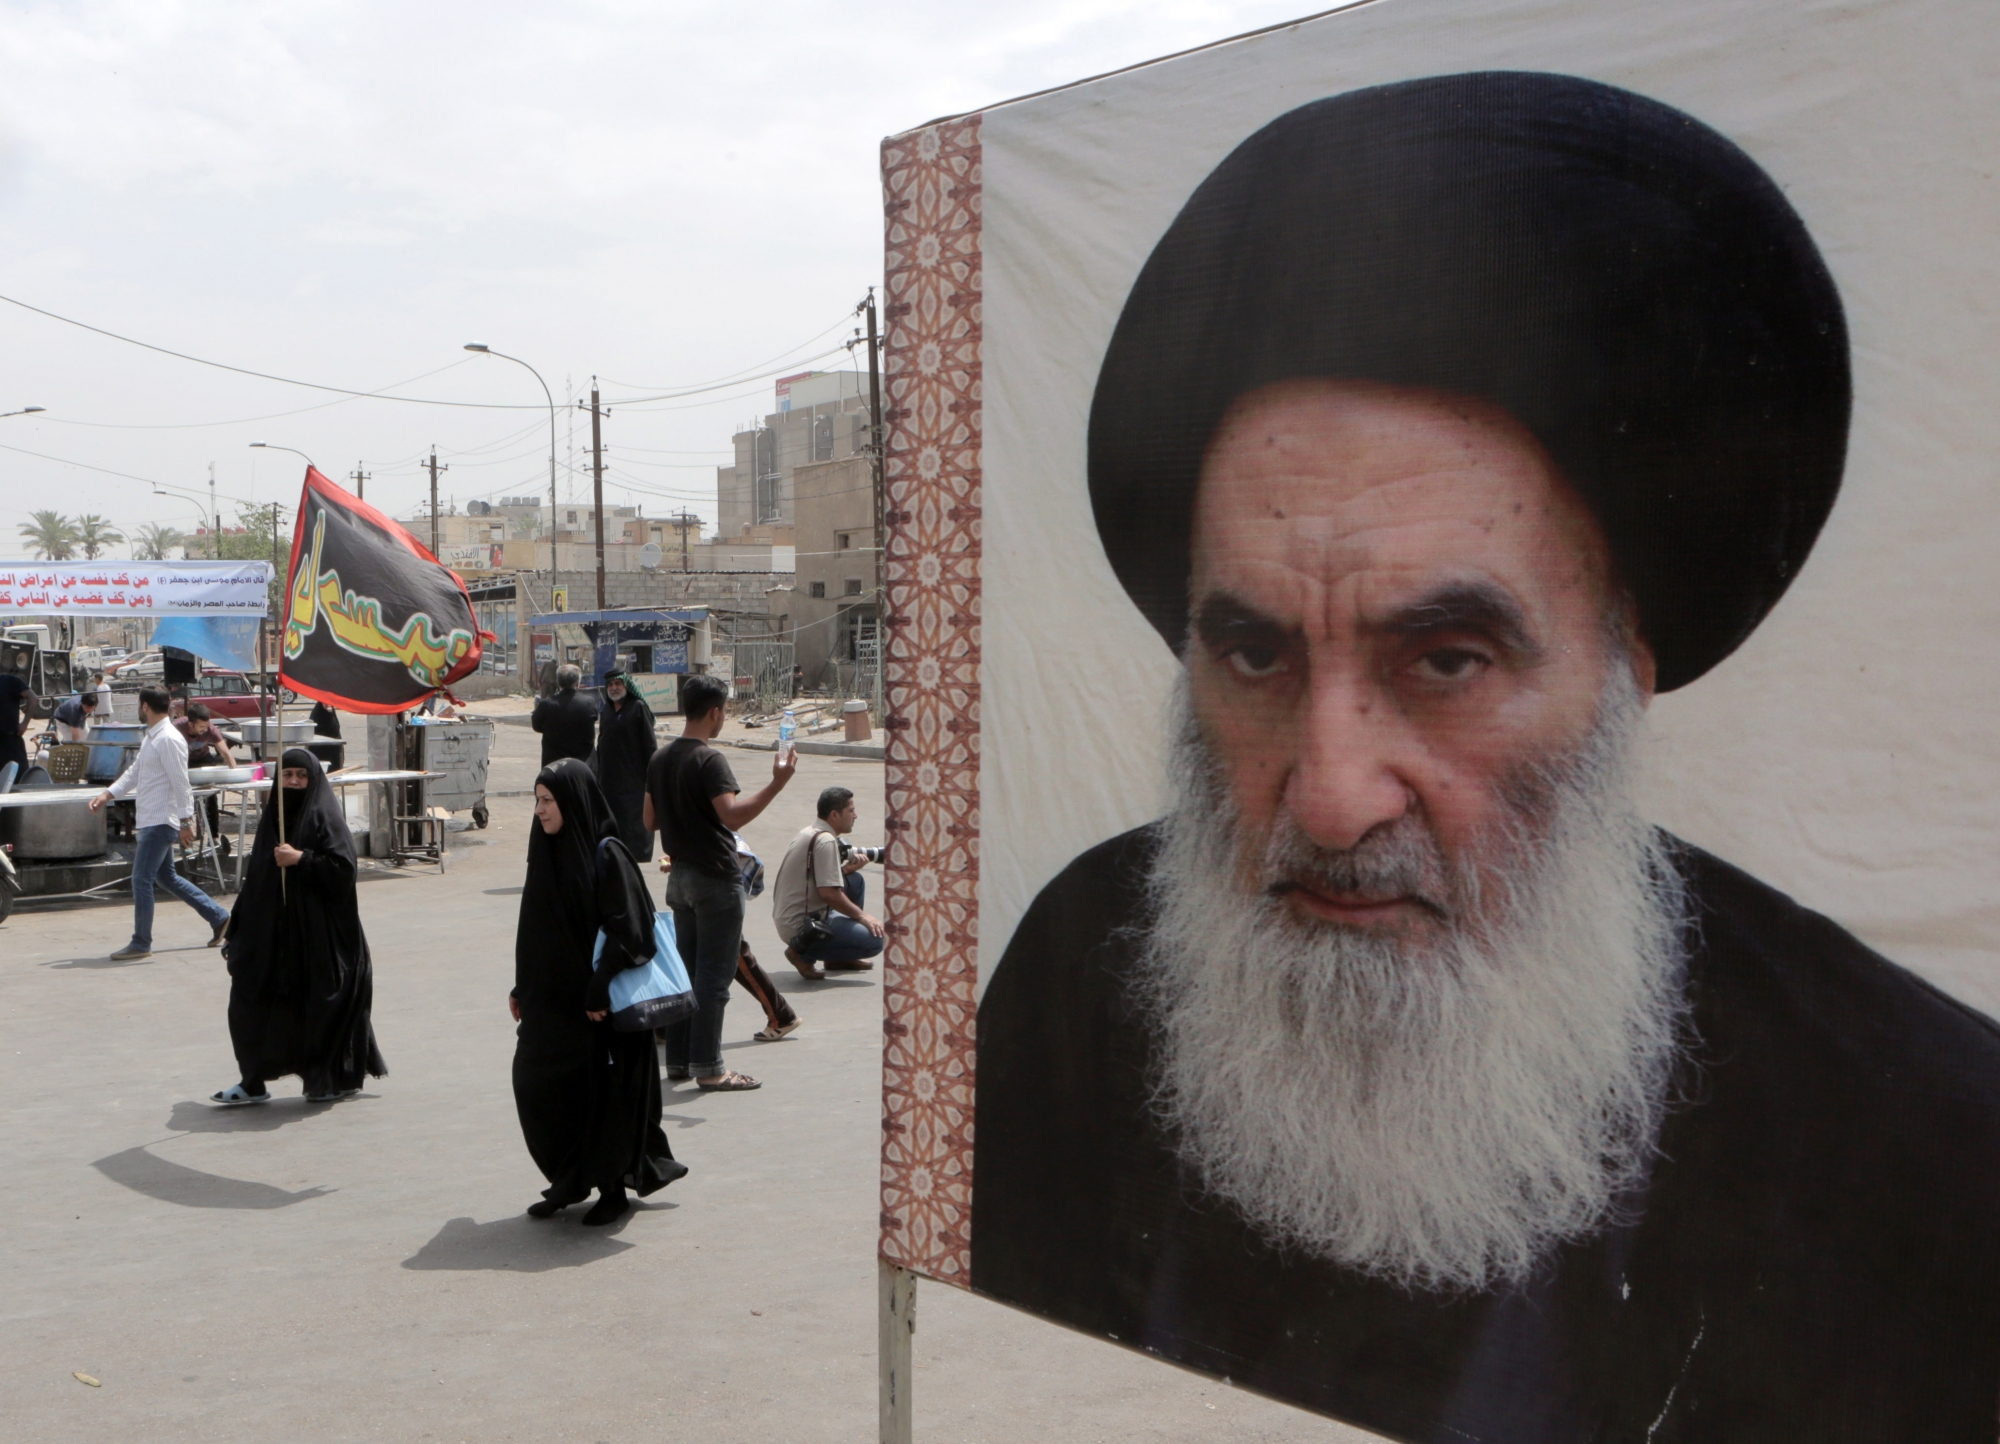 Shiite pilgrims make their way to the shrine of Imam Moussa al-Kadhim as passing by a poster of Shiite spiritual leader Grand Ayatollah Ali al-Sistani, right, in Baghdad, Iraq, Thursday, May 22, 2014. Shiite pilgrims are expected to converge on the shrine in northern Baghdad during their annual march to commemorate the eighth-century death of Imam Moussa al-Kadhim, a key Shiite saint. (AP Photo/Khalid Mohammed)